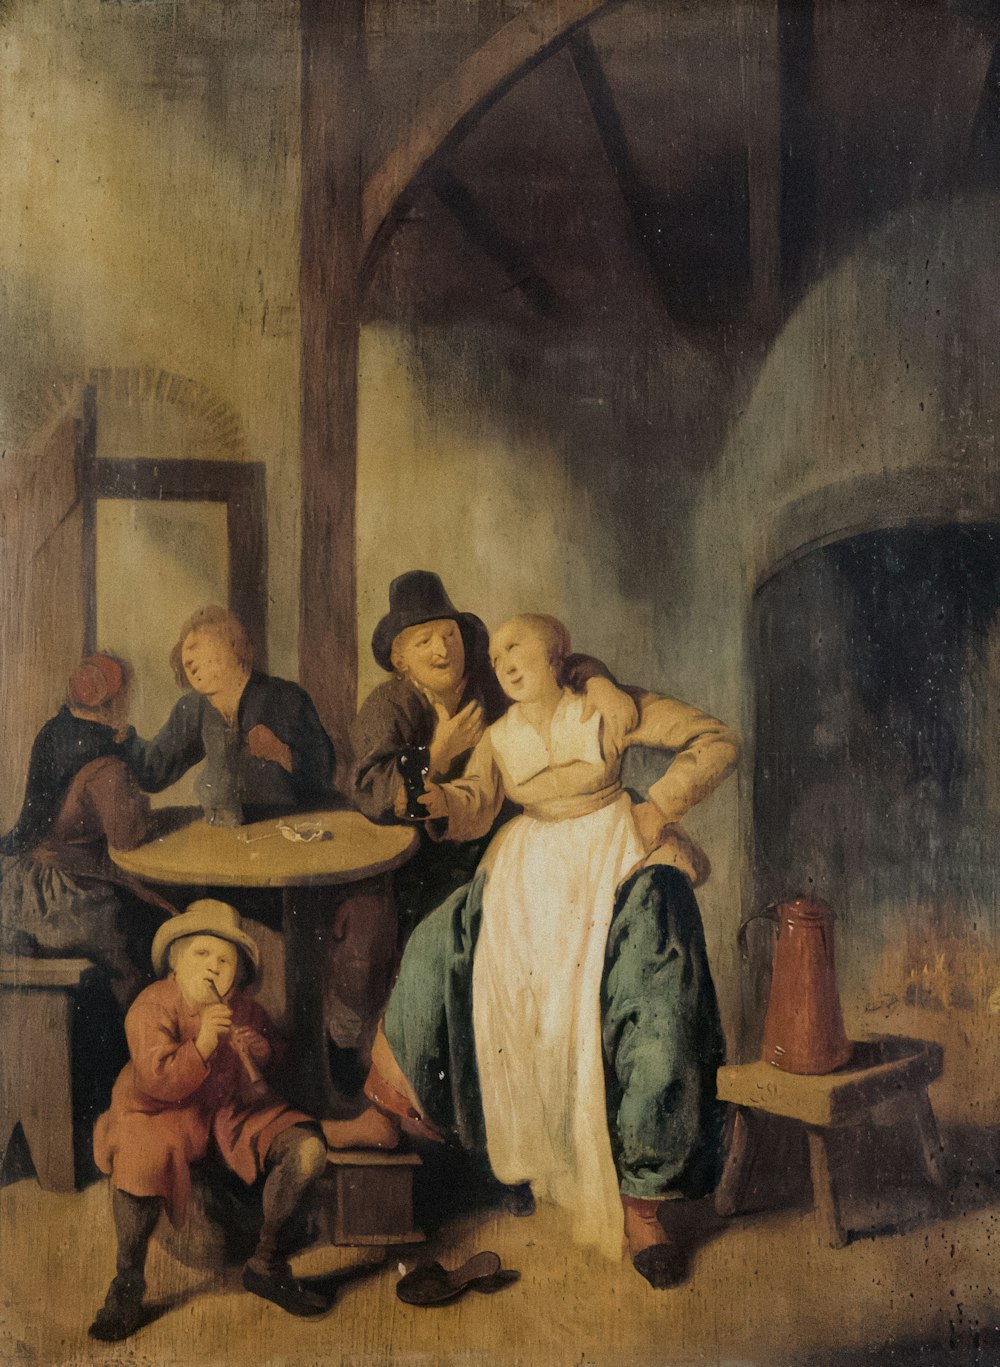 a painting of a family in a tavern